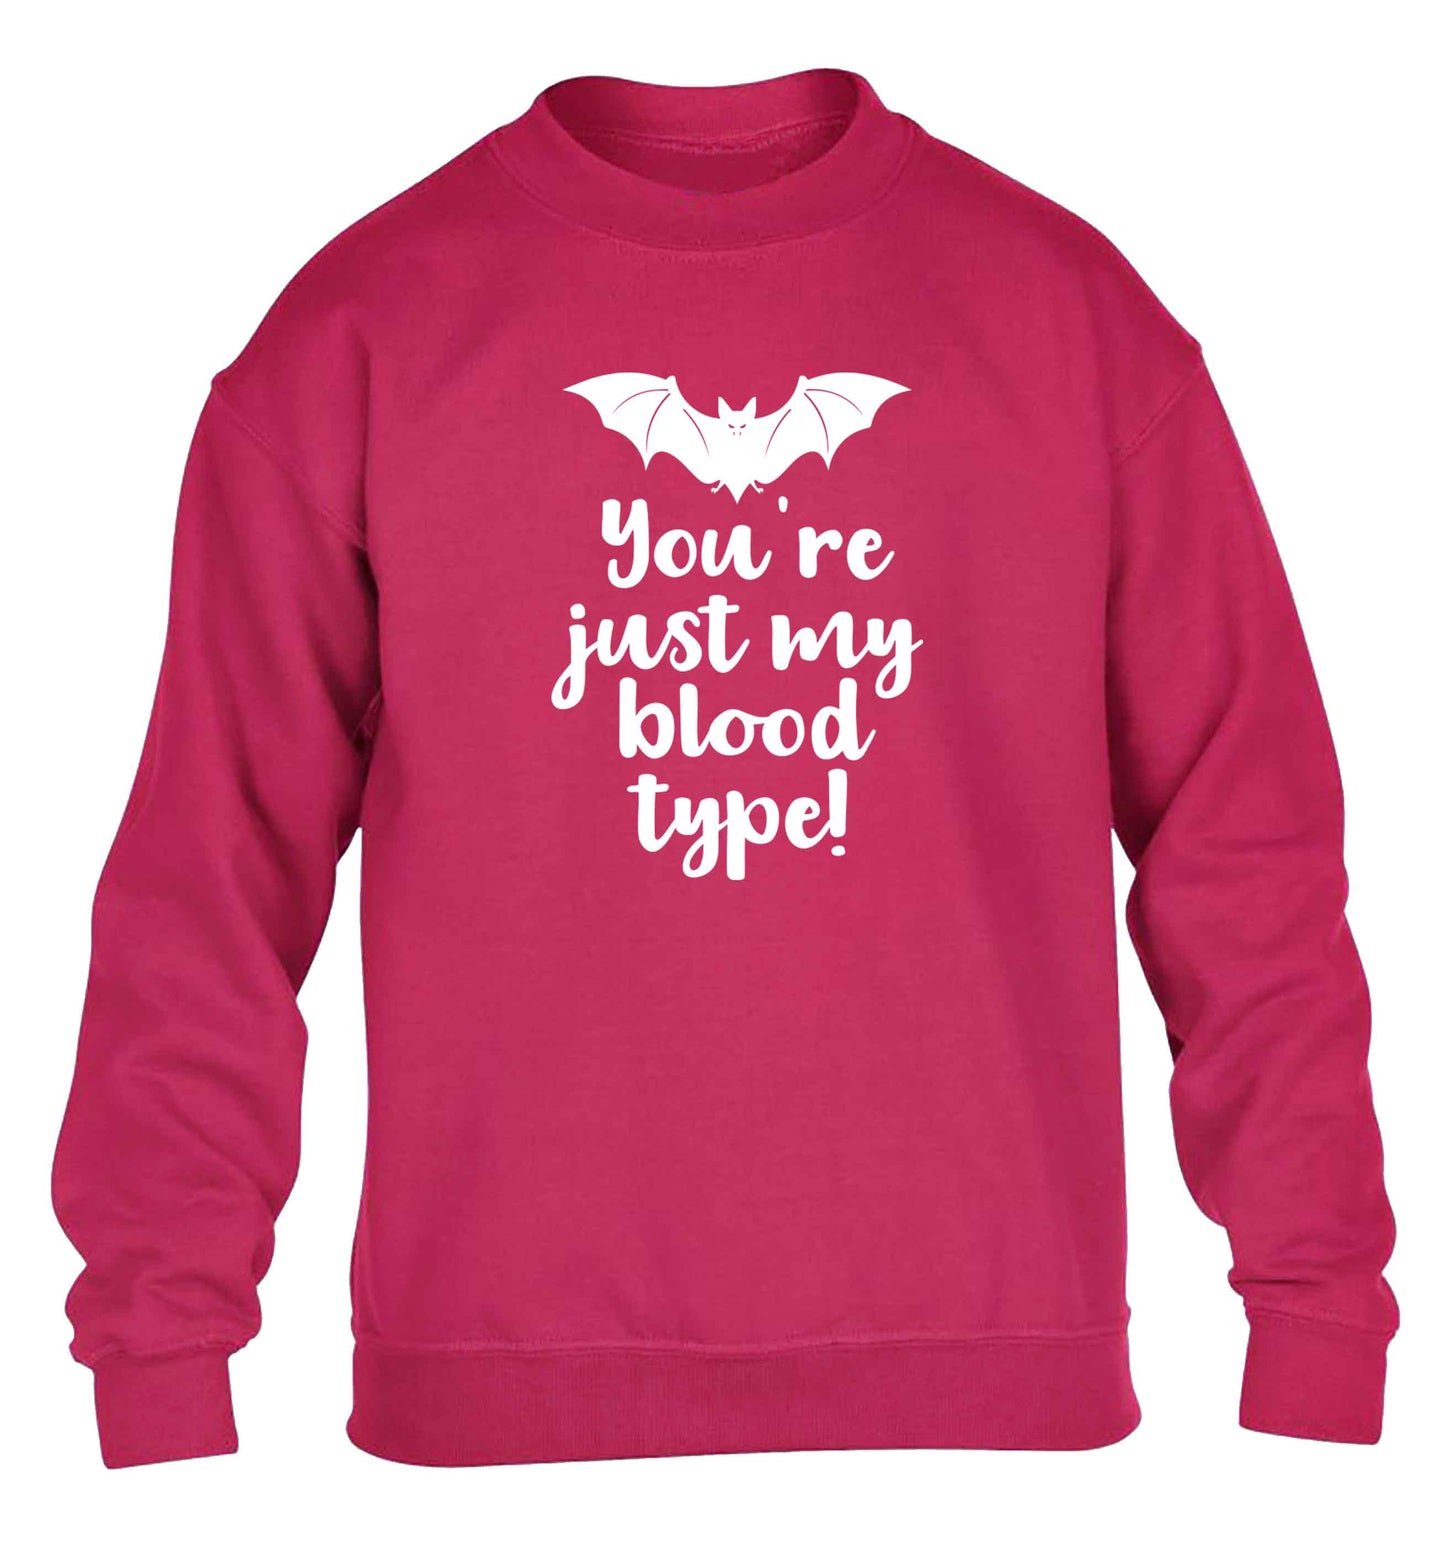 You're just my blood type children's pink sweater 12-13 Years